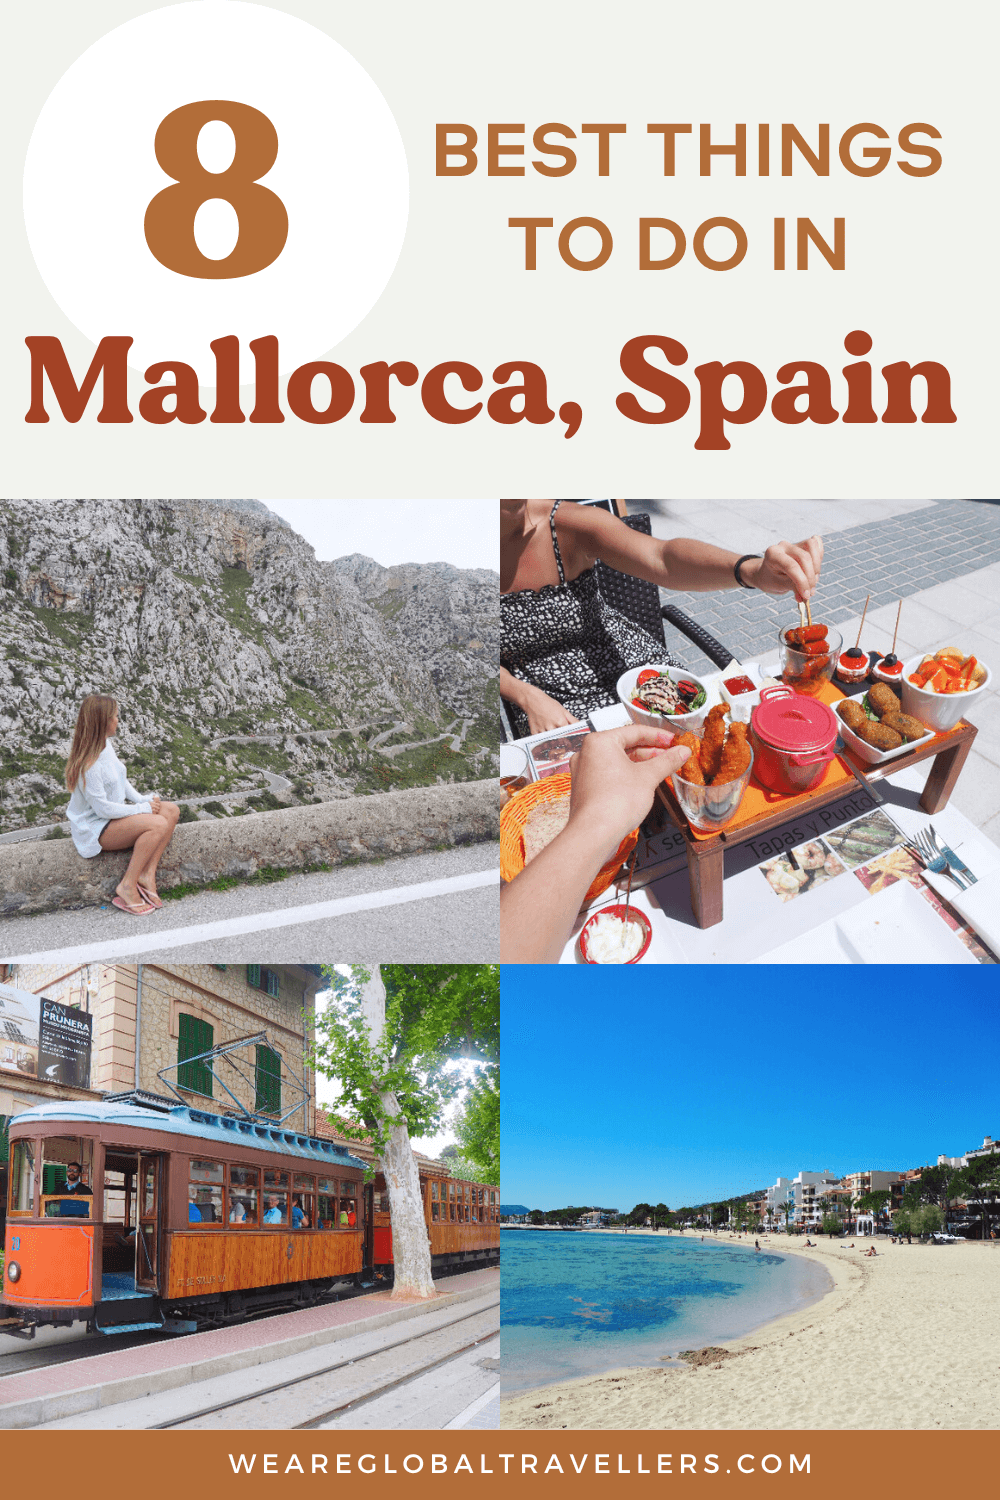 A road trip itinerary for Mallorca, Spain